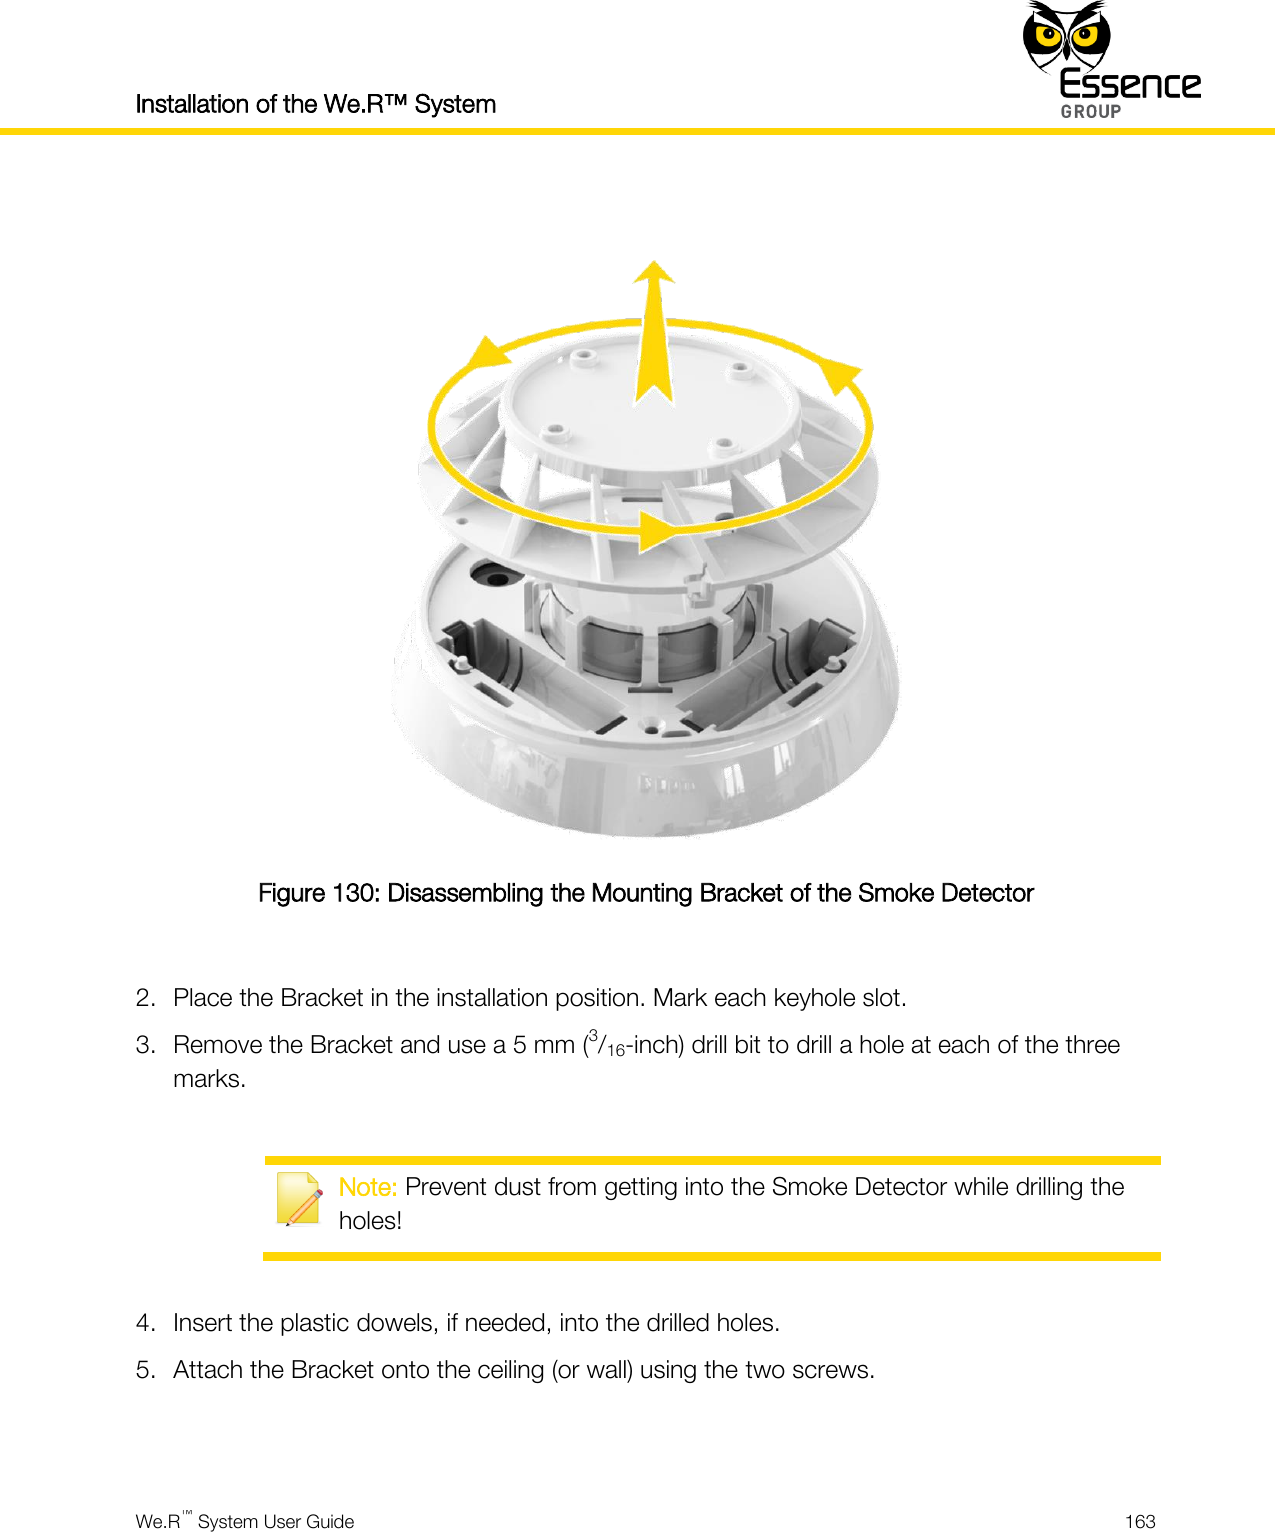 Installation of the We.R™ System    We.R™ System User Guide  163    Figure 130: Disassembling the Mounting Bracket of the Smoke Detector  2. Place the Bracket in the installation position. Mark each keyhole slot. 3. Remove the Bracket and use a 5 mm (3/16-inch) drill bit to drill a hole at each of the three marks.   Note: Prevent dust from getting into the Smoke Detector while drilling the holes!  4. Insert the plastic dowels, if needed, into the drilled holes. 5. Attach the Bracket onto the ceiling (or wall) using the two screws.   